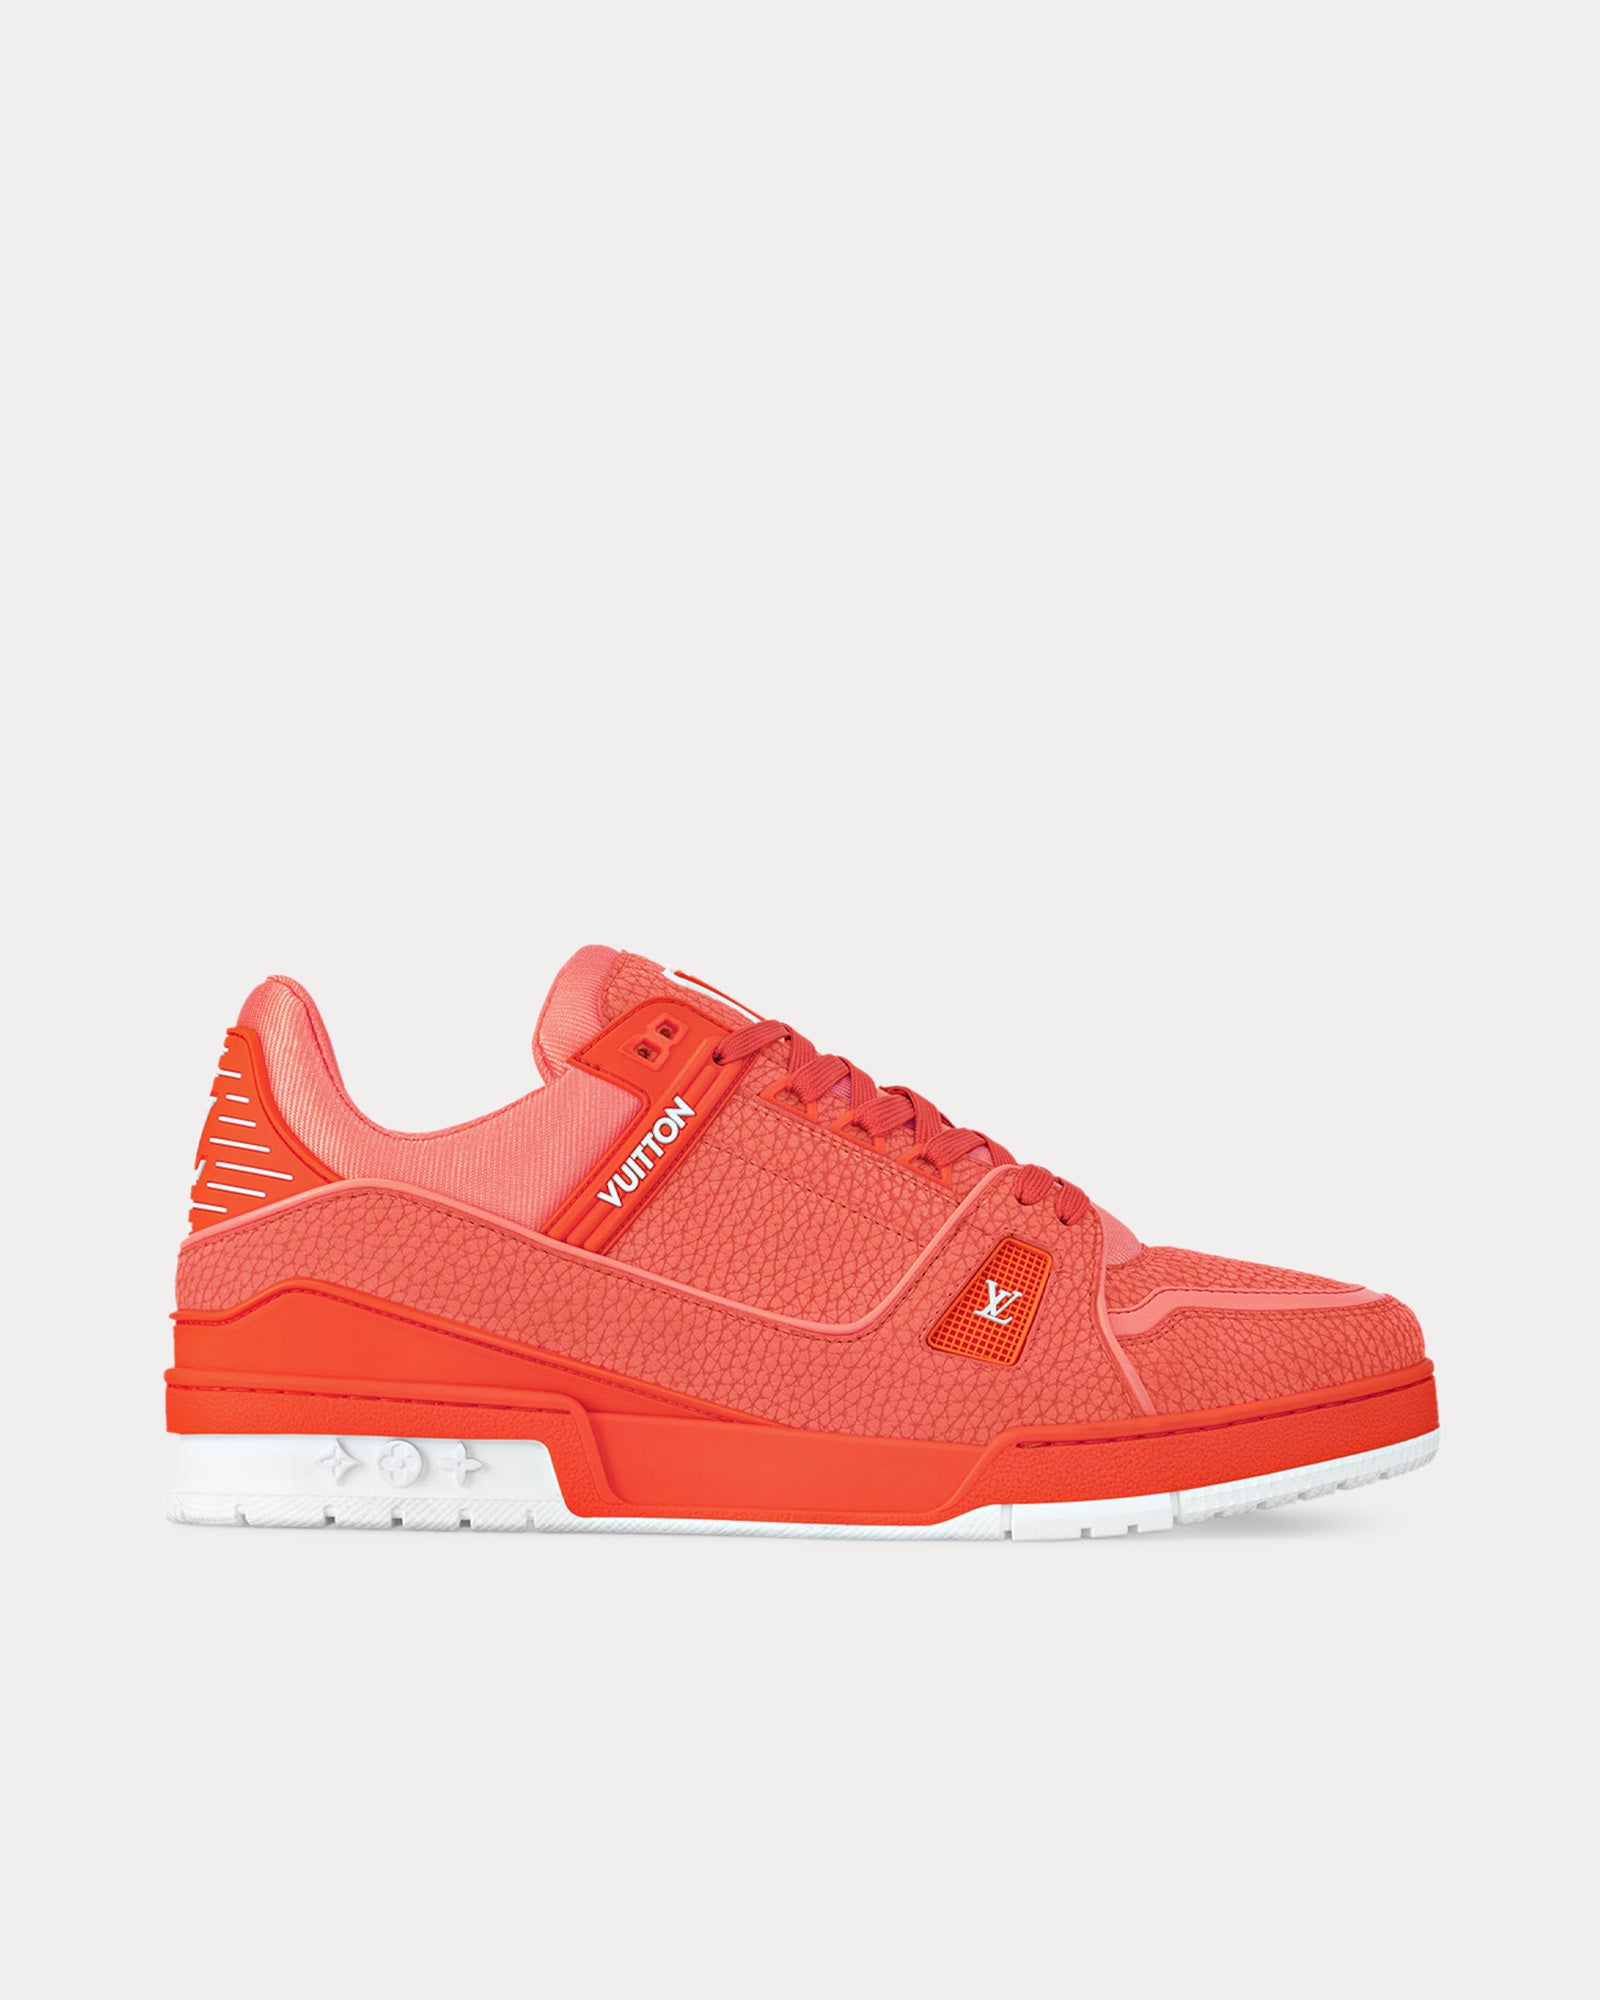 Louis Vuitton - LV Trainer Grained Calf Leather Pastel Orange Low Top Sneakers